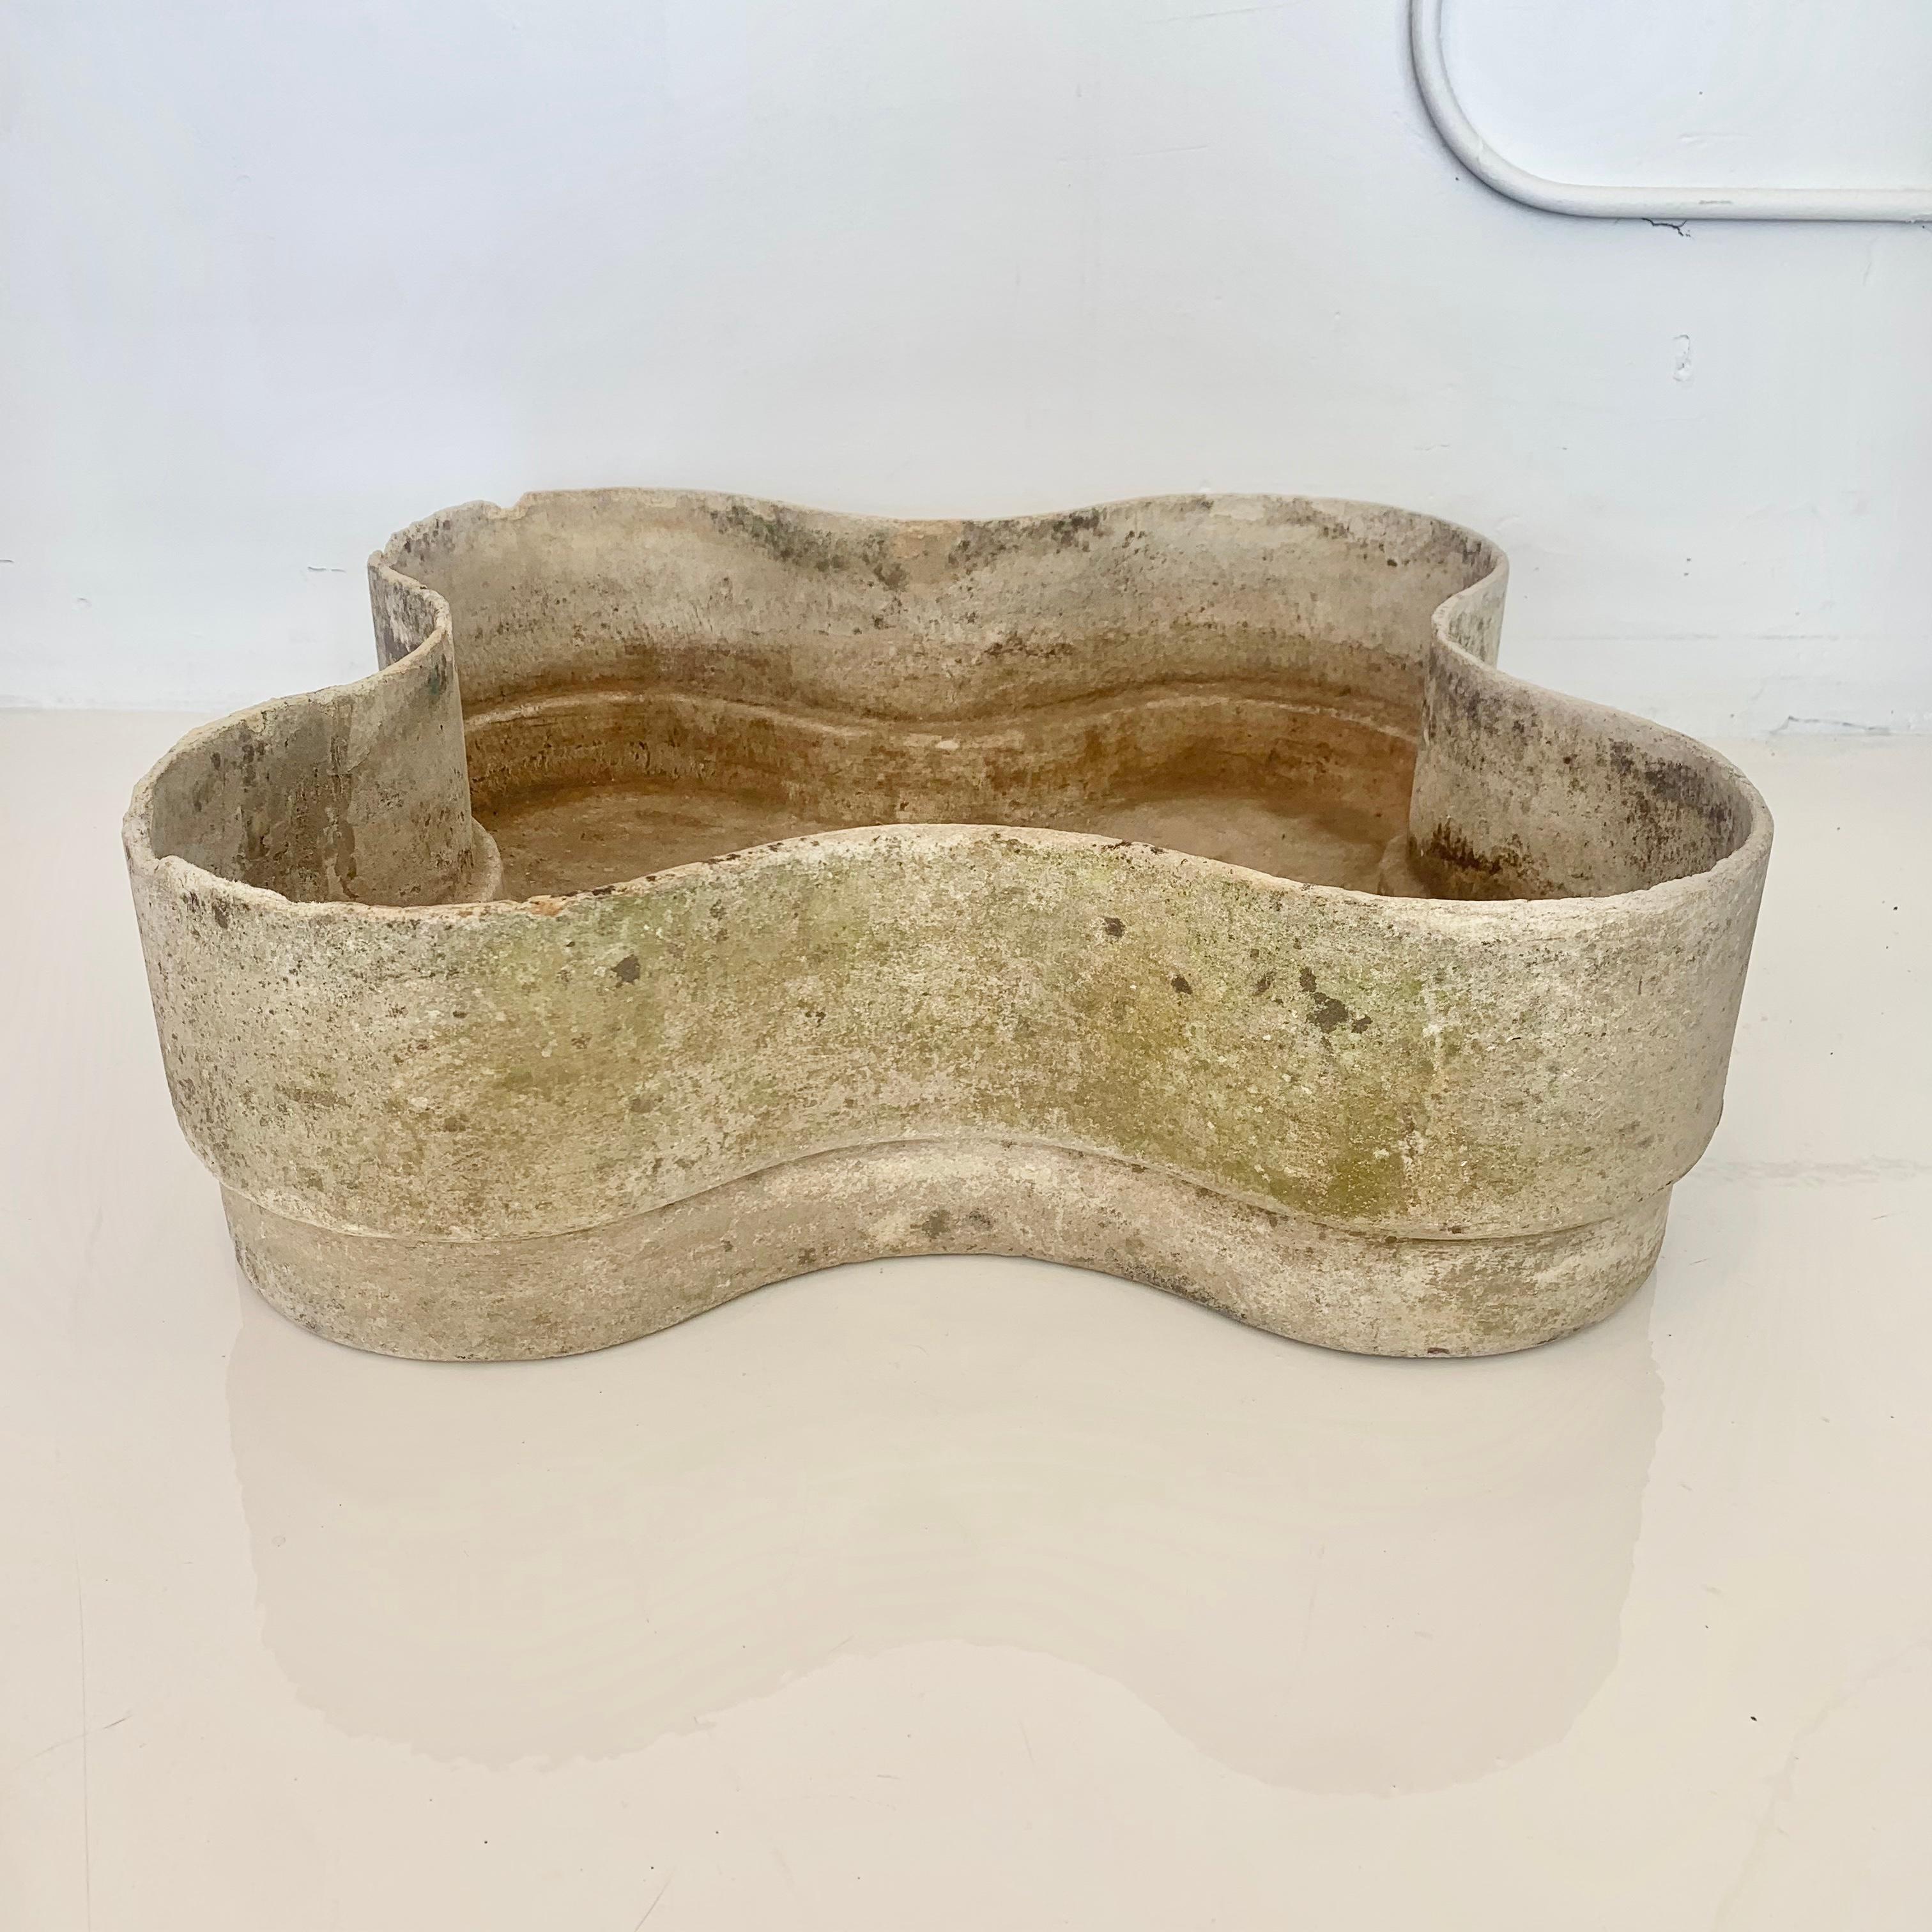 Large scale concrete planter by Swiss architect Willy Guhl. Unique biomorphic shape with four rounded edges. Moss and lichen, with great patina. Great addition to any outdoor space. Good vintage condition with perfect patina. Some losses to the lip